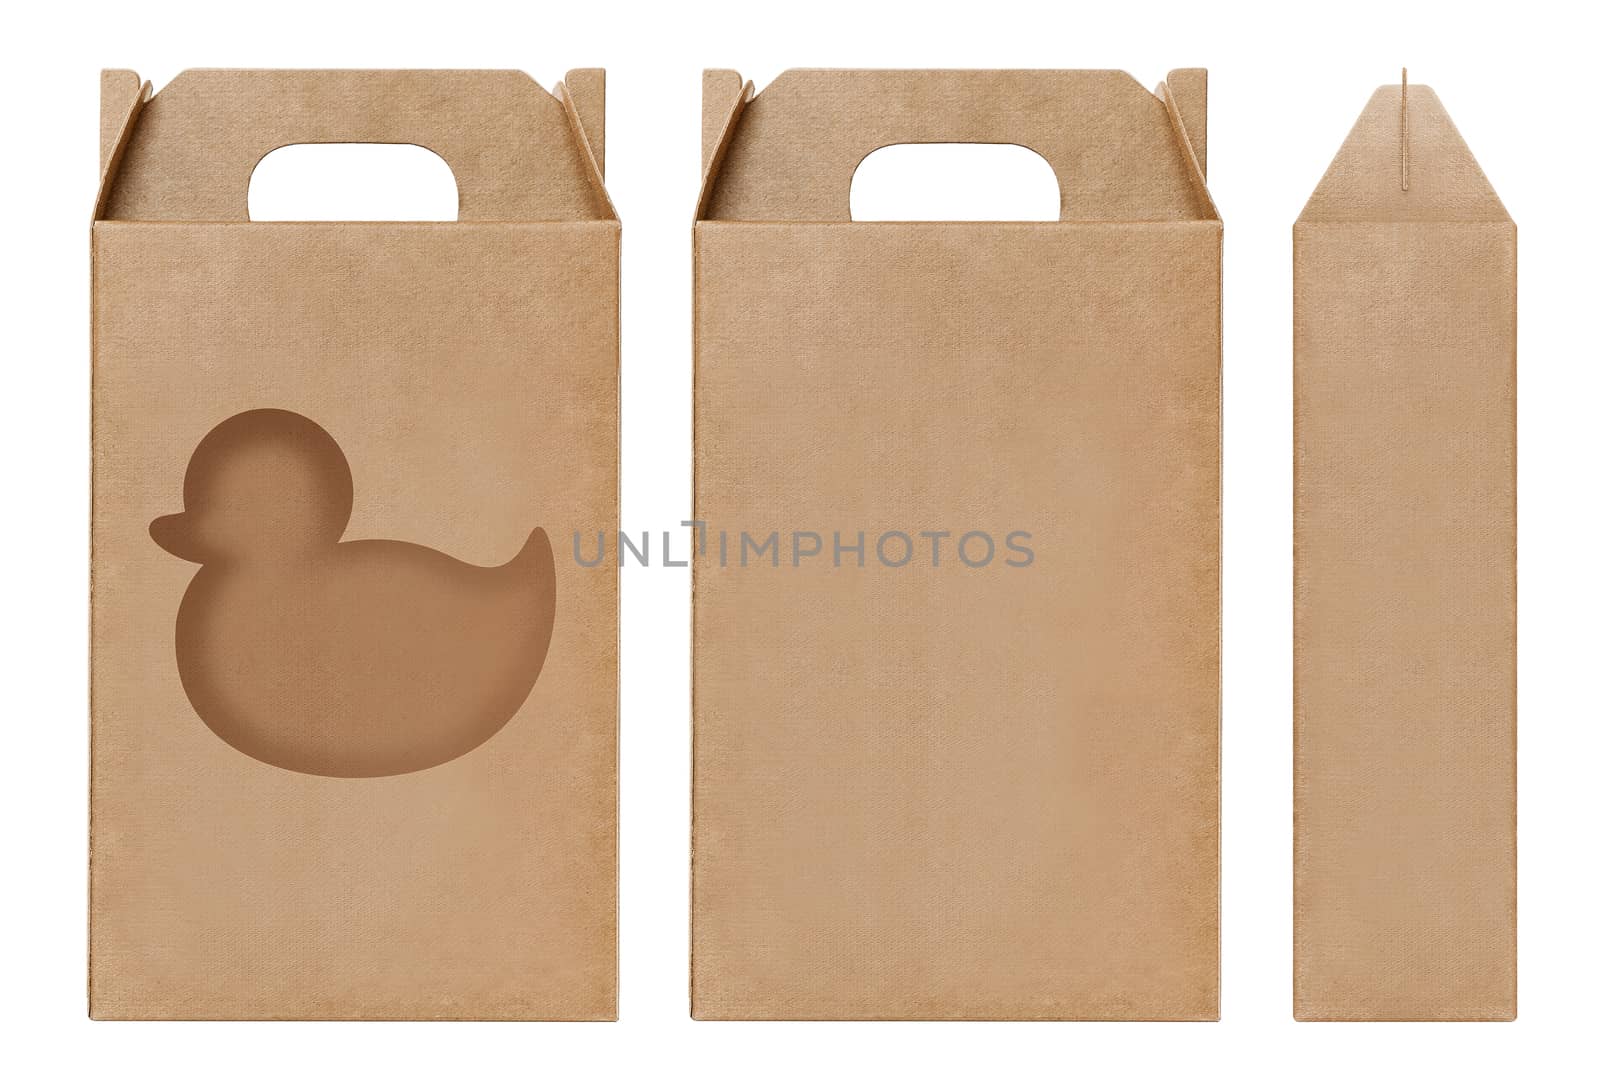 Box brown window Duck shape cut out Packaging template, Empty kraft Box Cardboard isolated white background, Boxes Paper kraft natural material, Gift Box Brown Paper from Industrial Packaging carton